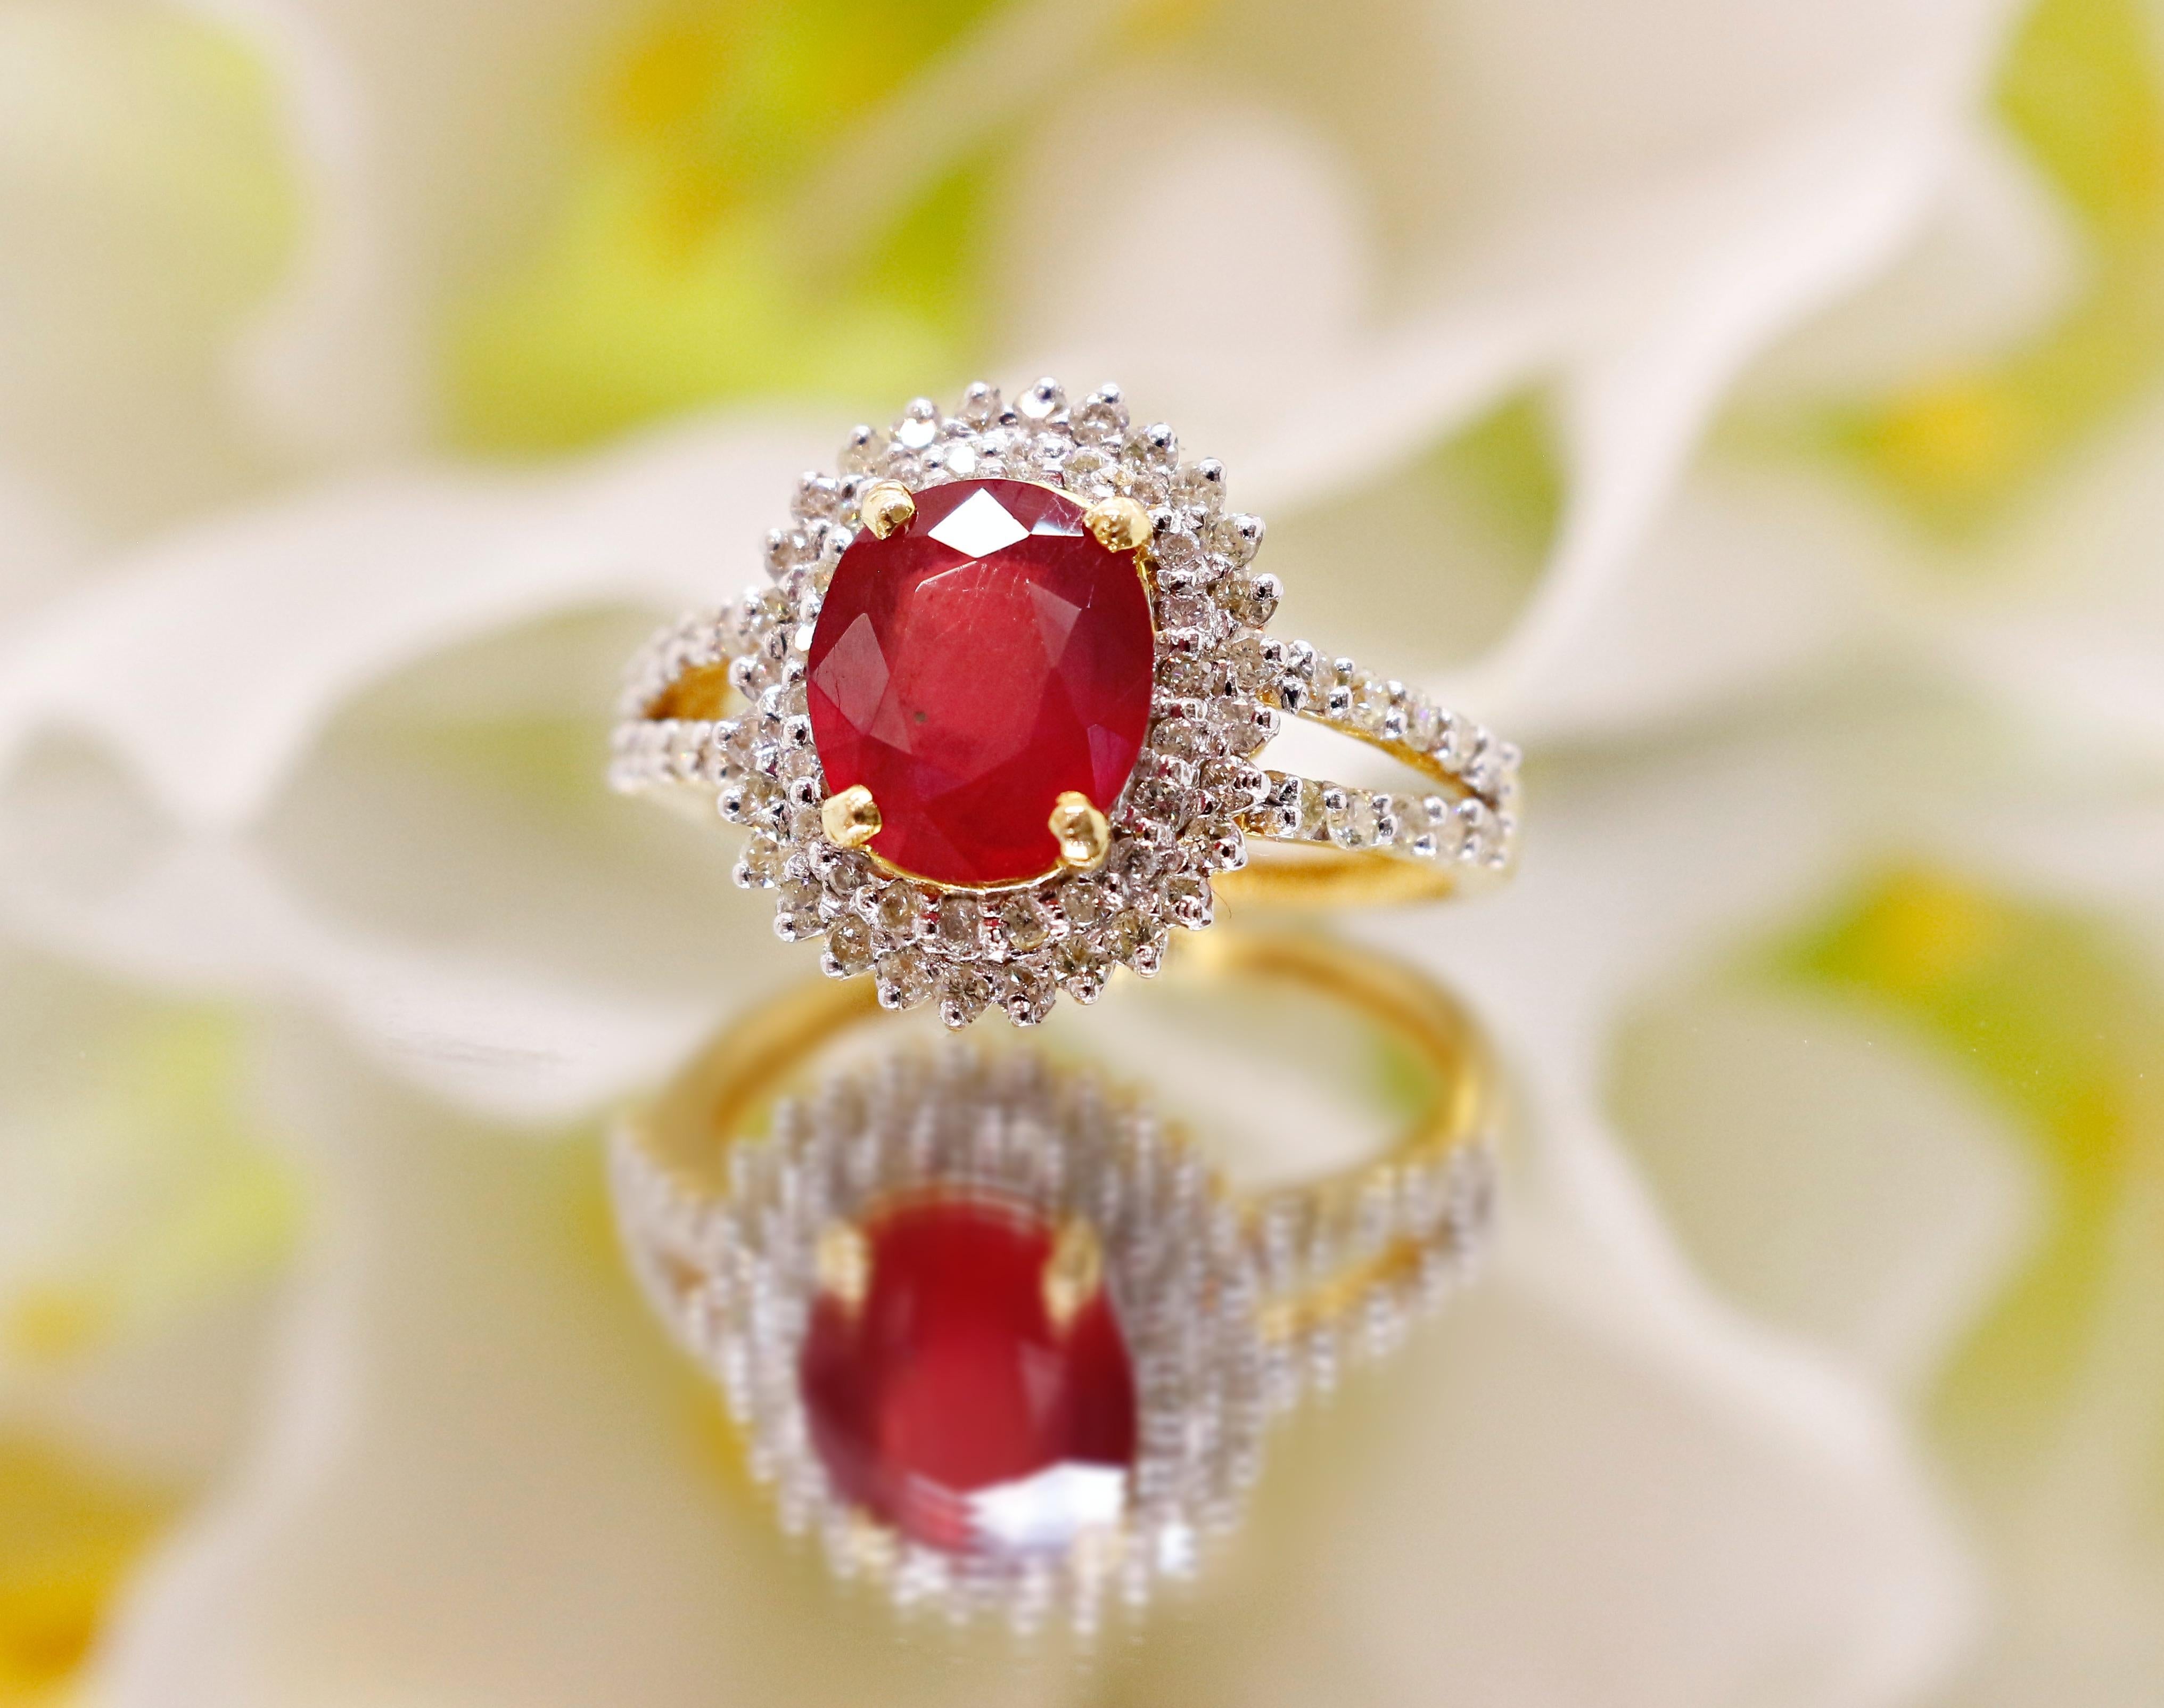 An exquisite 14k gold ruby halo ring.
For when only the best will do.

Handmade in Japan, this delightful ruby ring makes an unforgettable engagement token.
But, as our clients tell us, there are SO many wonderful opportunities to give something so